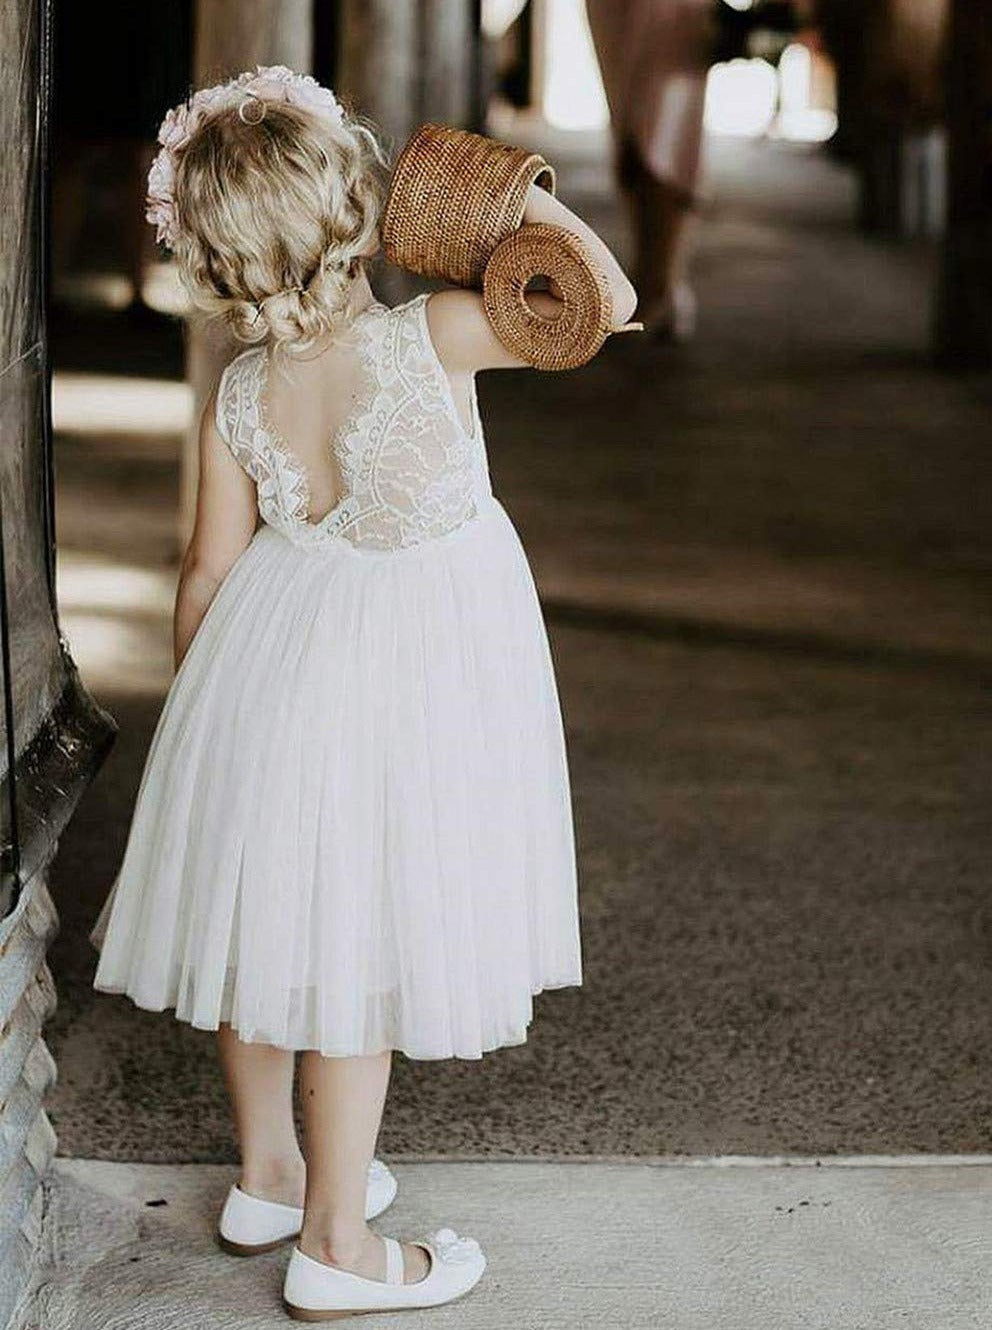 2Bunnies Flower Girl Dress Rose Lace Back A-Line Sleeveless Straight Tulle Knee (White) - 2BUNNIES